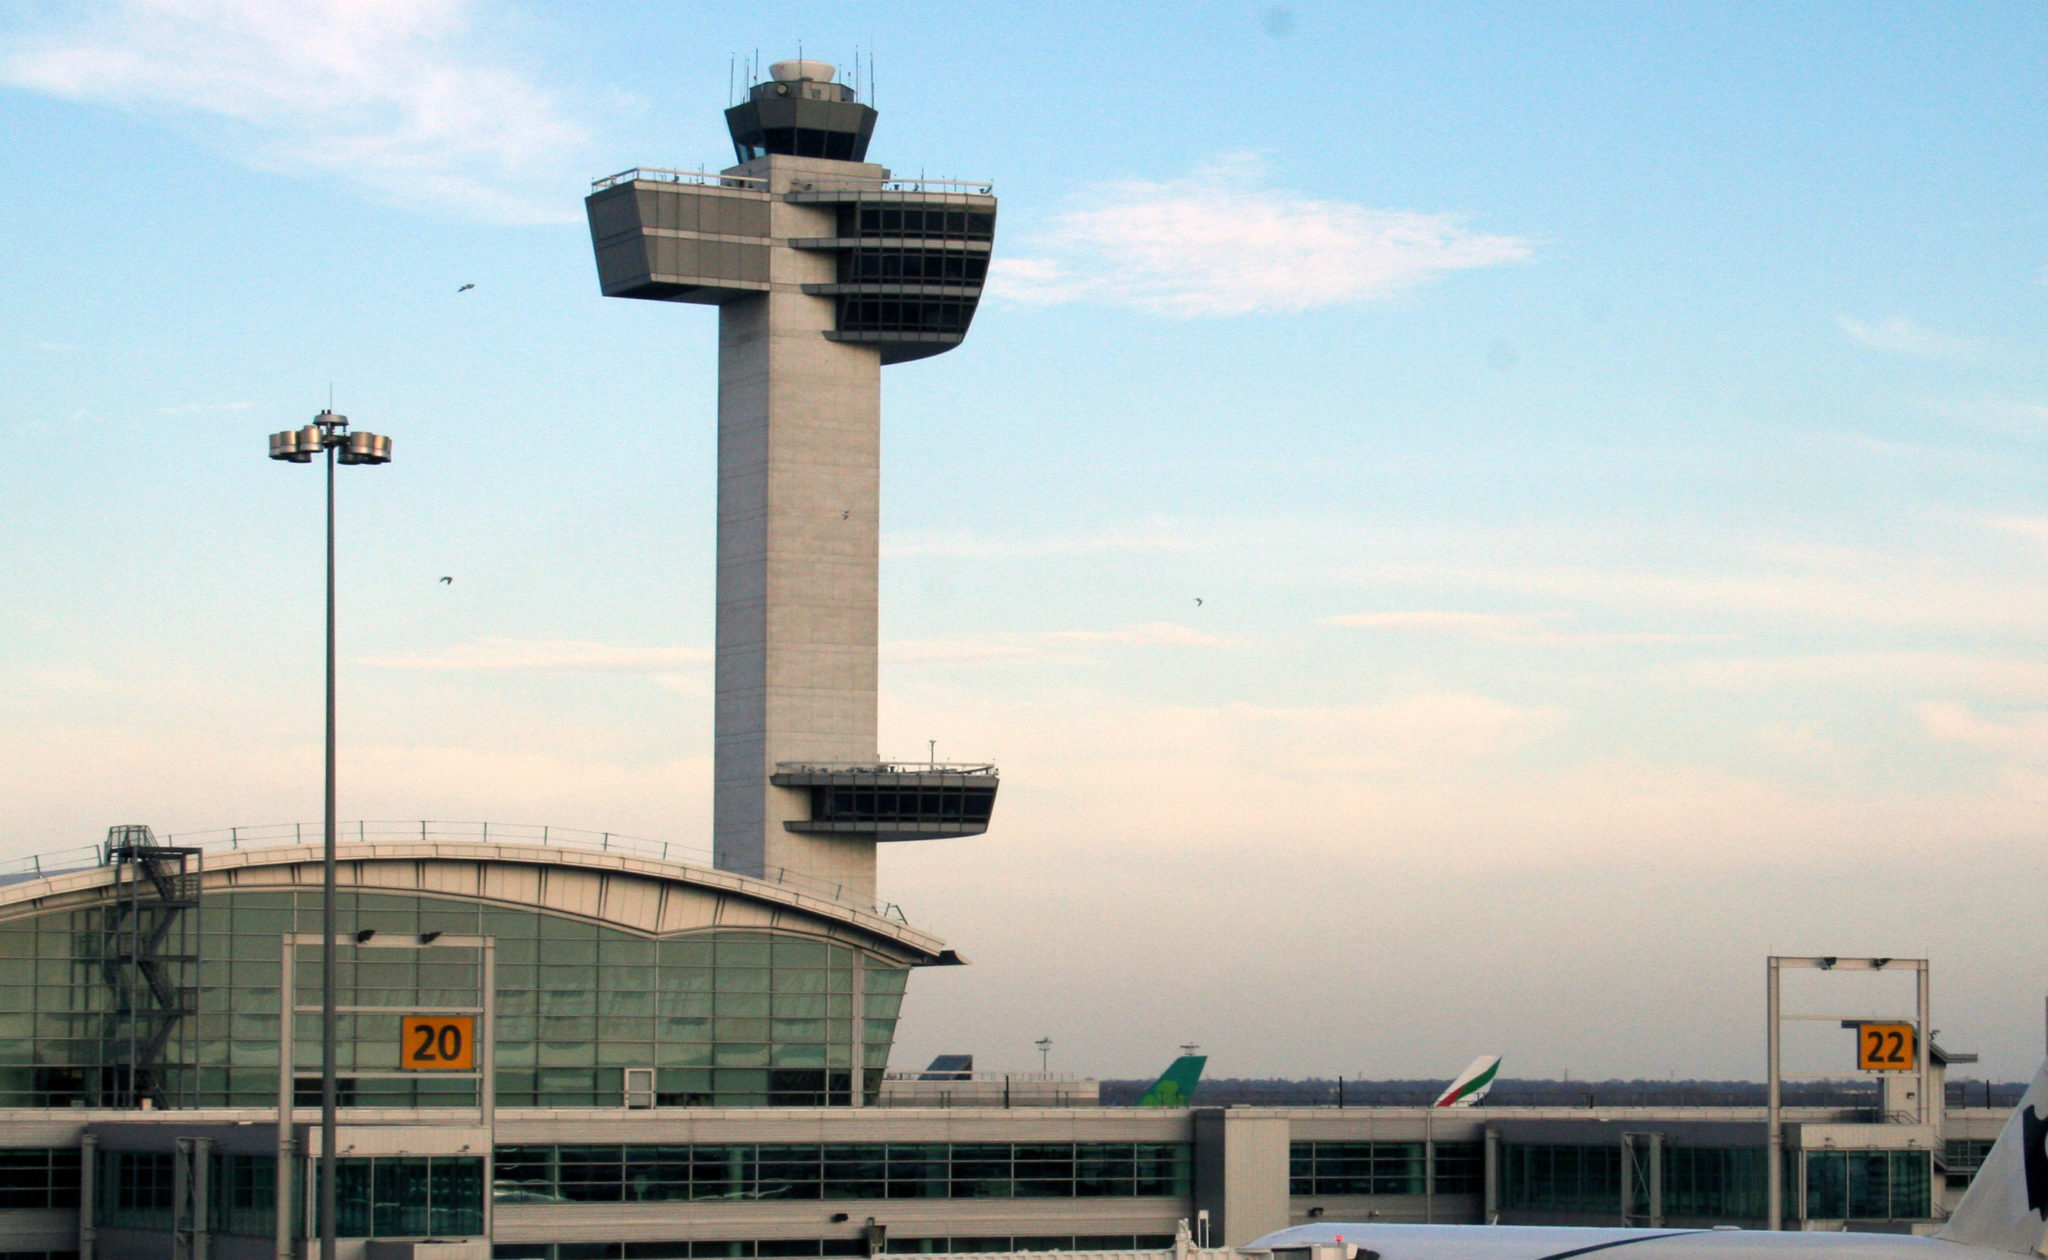 Jfk Tower Reopens After Covid Related Closure Avweb